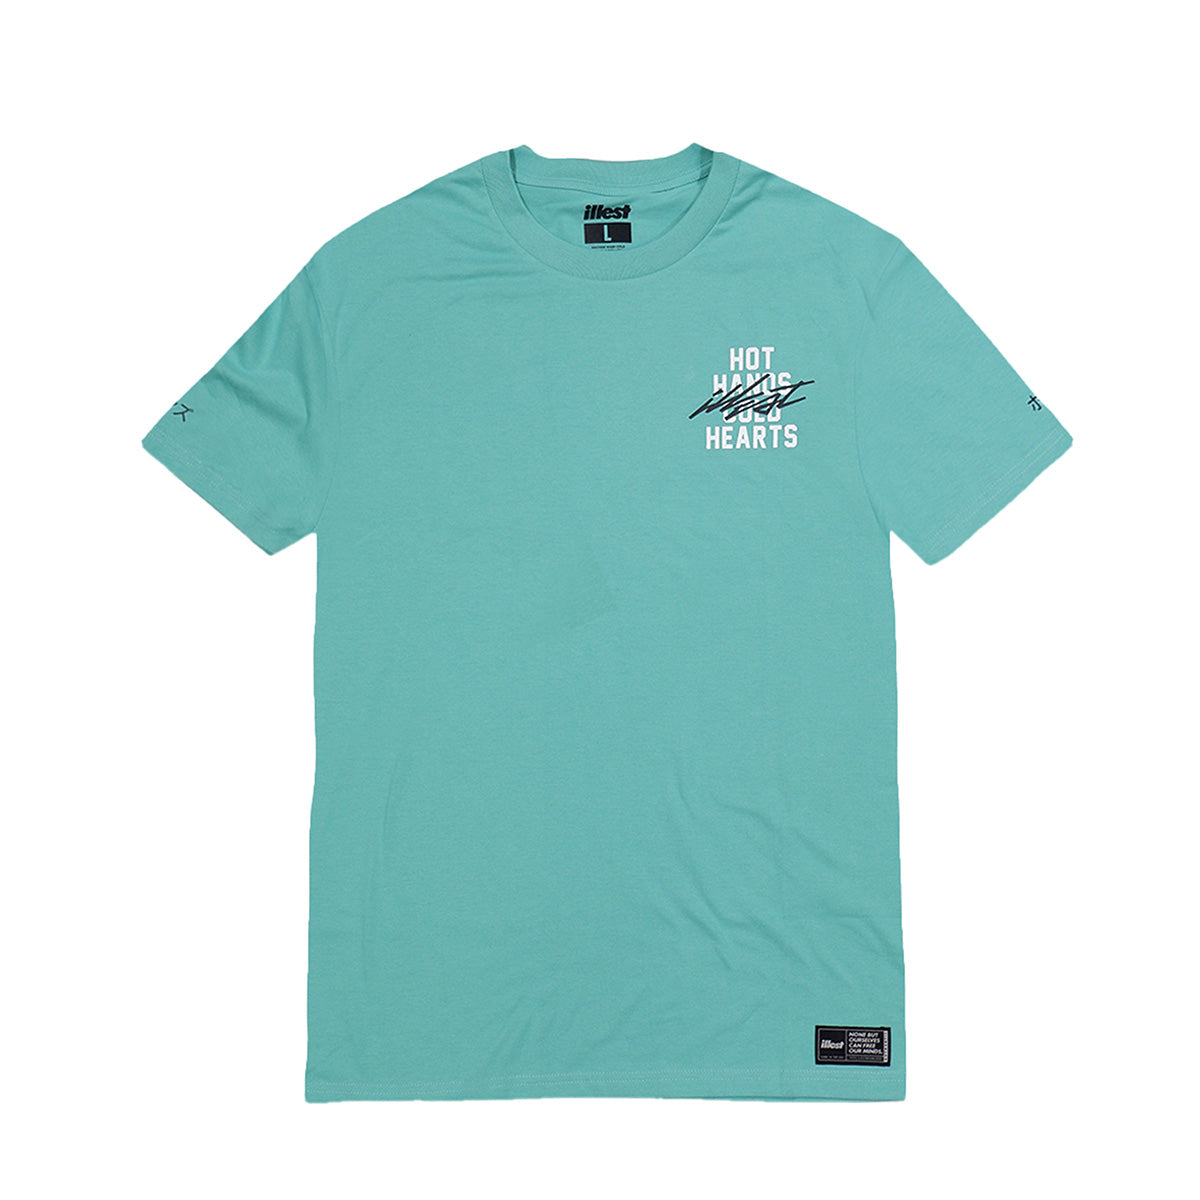 HOT HANDS COLD HEARTS TEAL SHORTS SLEEVES TEE